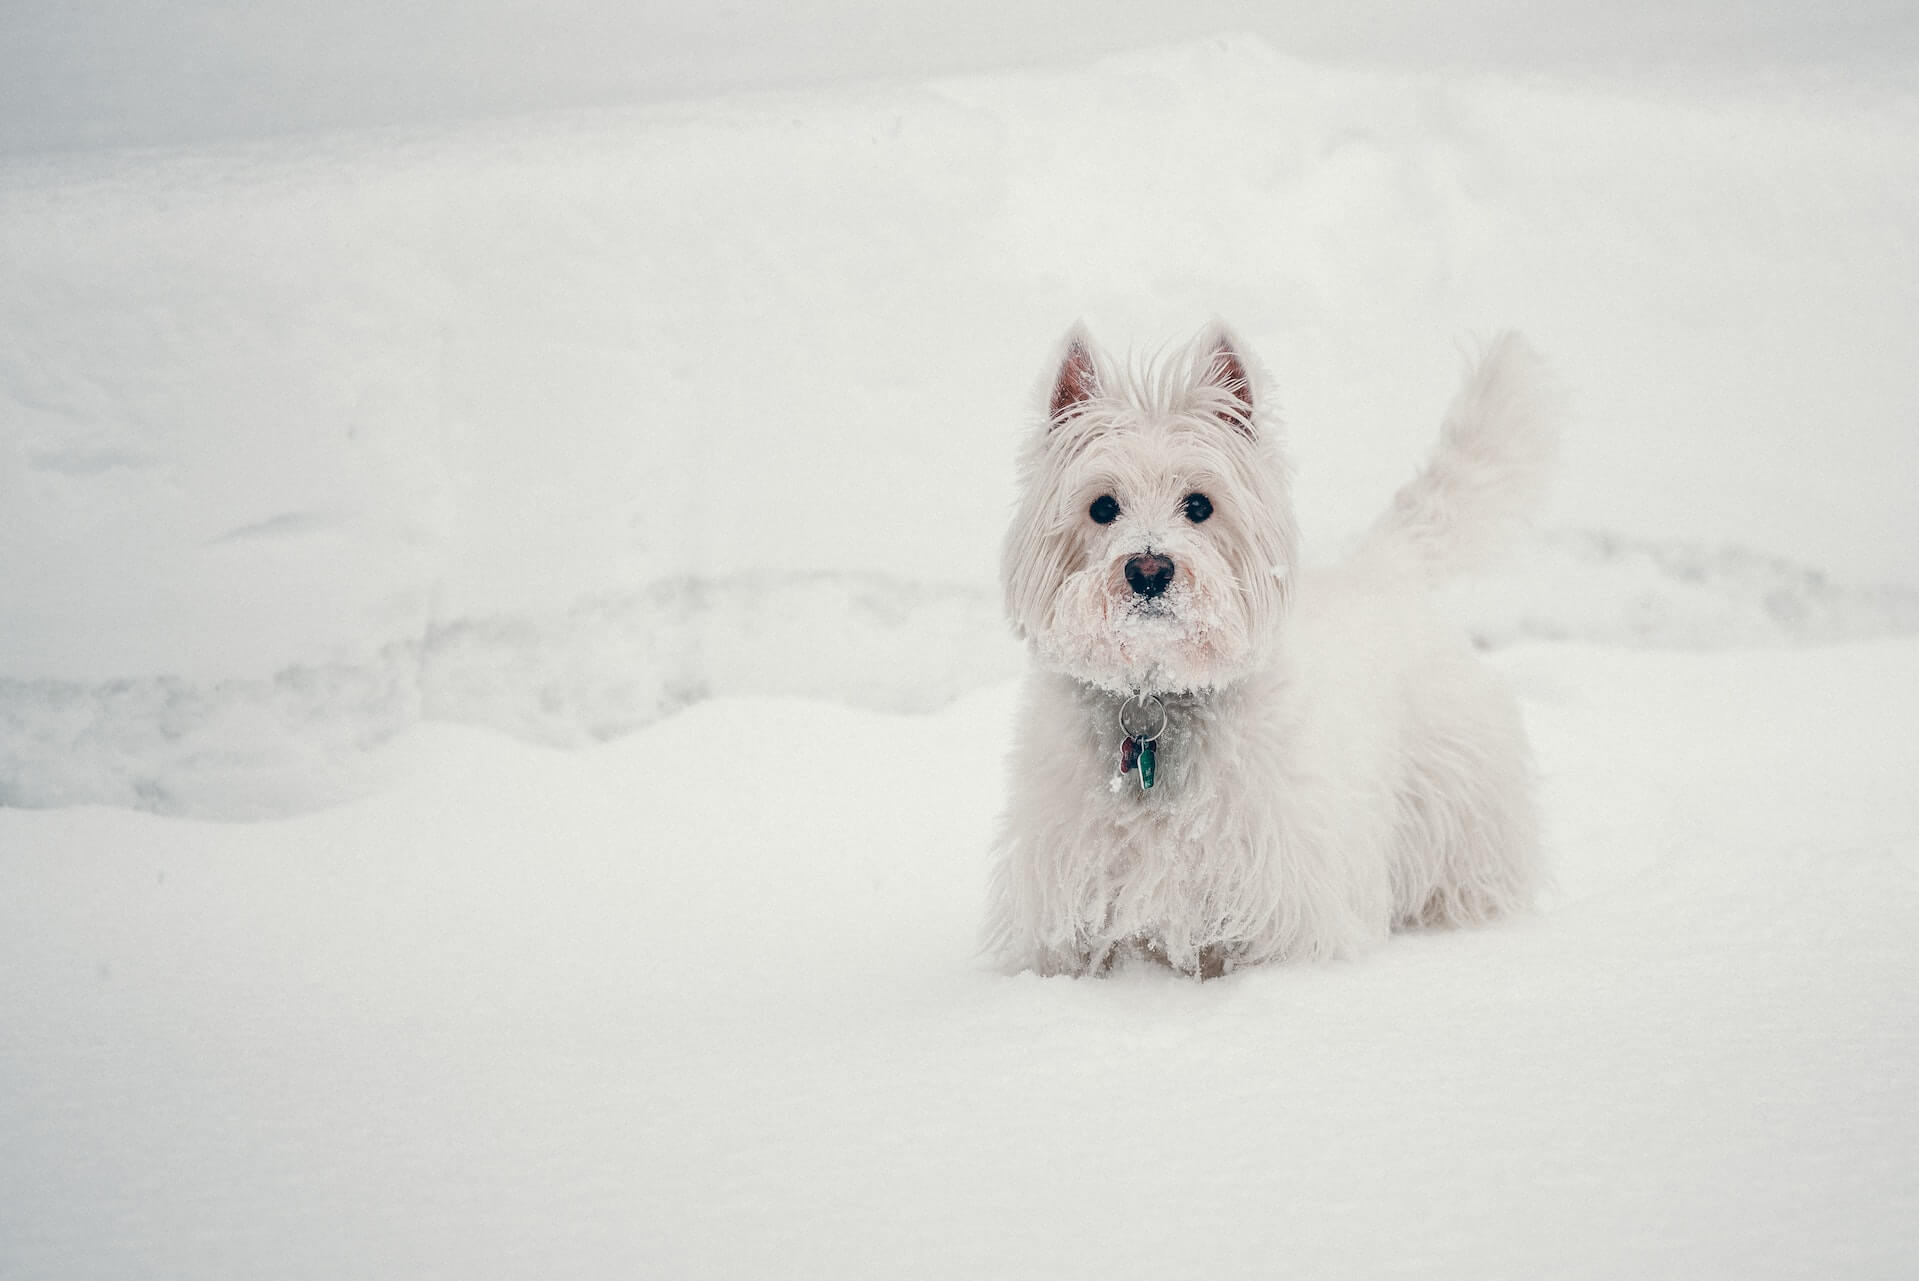 West Highland White Terrier against a snowy backdrop